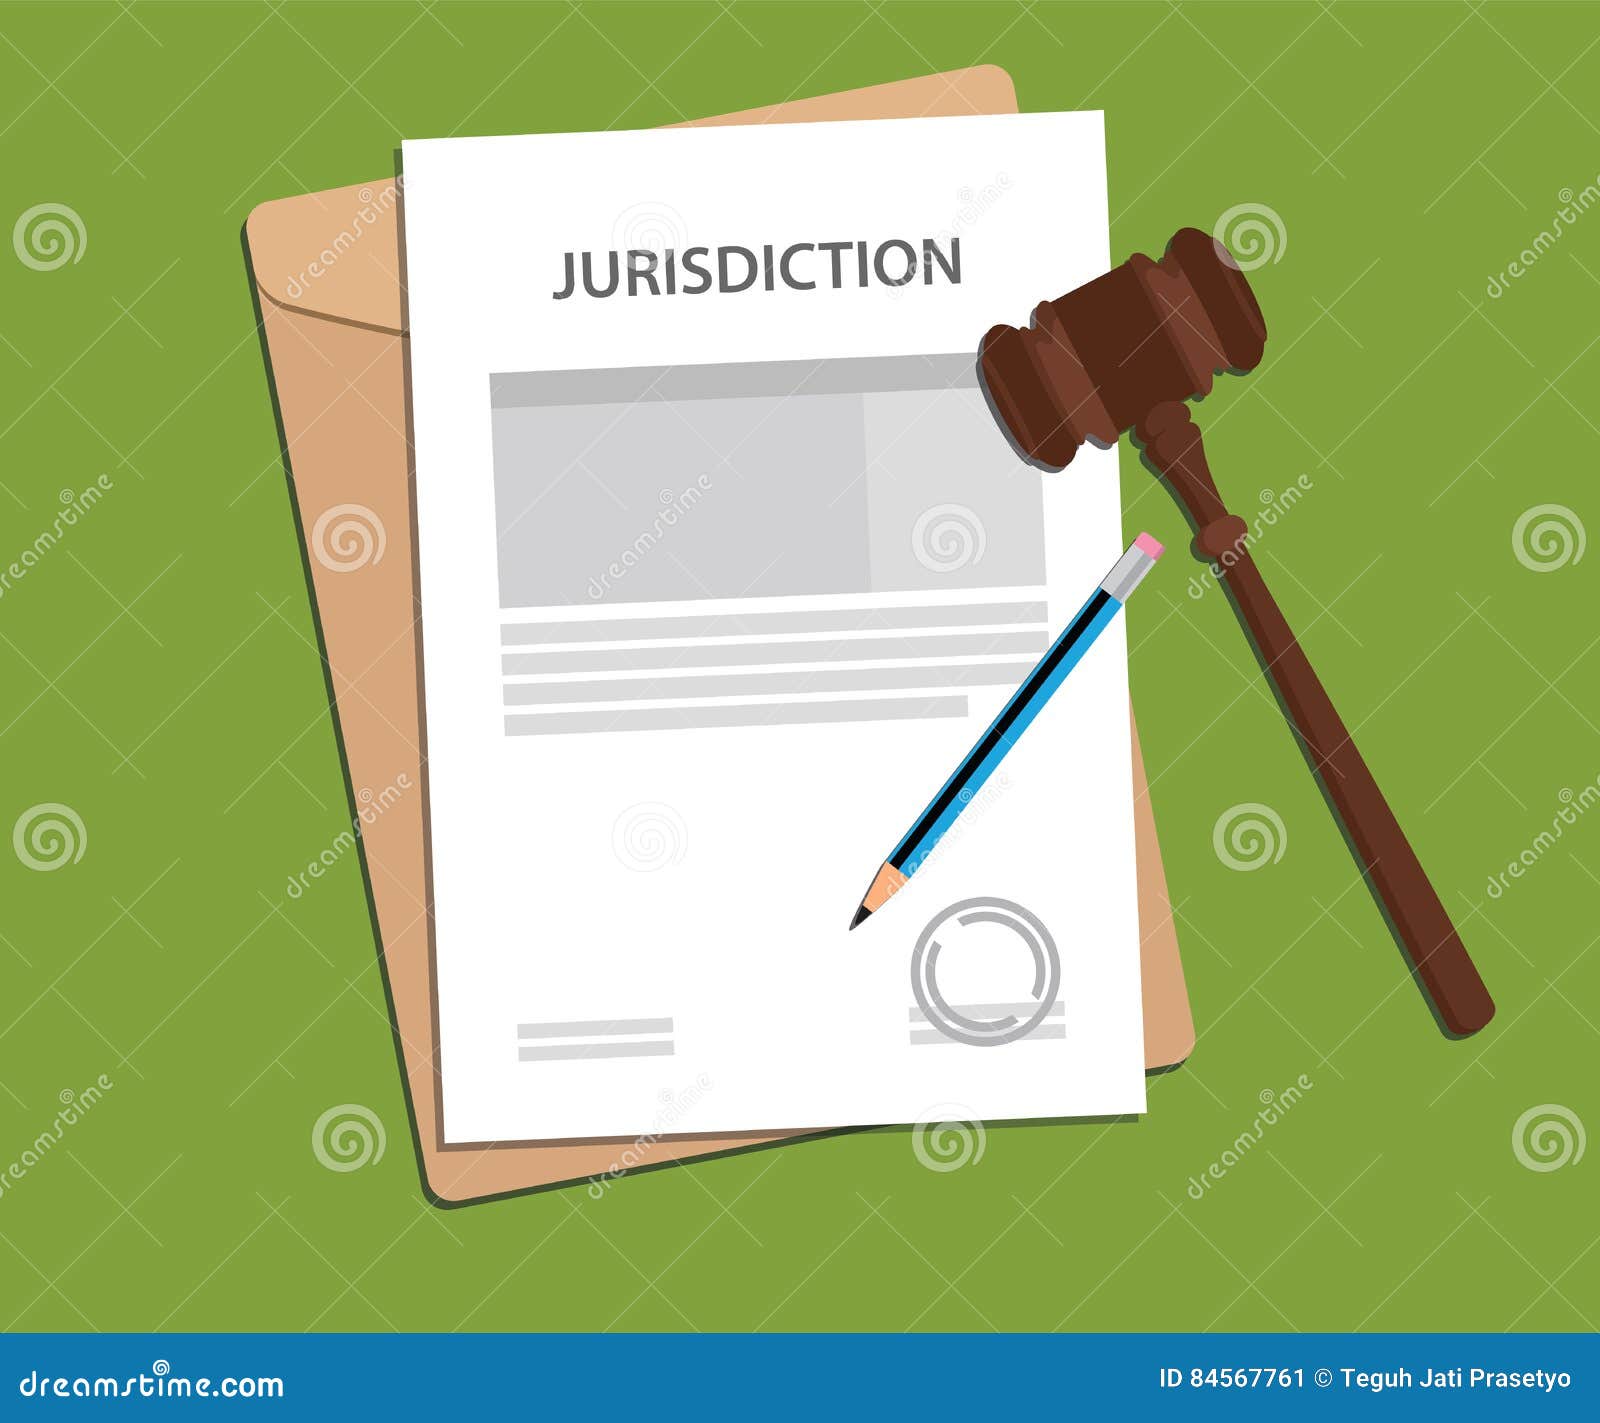 jurisdiction concept  with paper work signing signed gavel and folder document